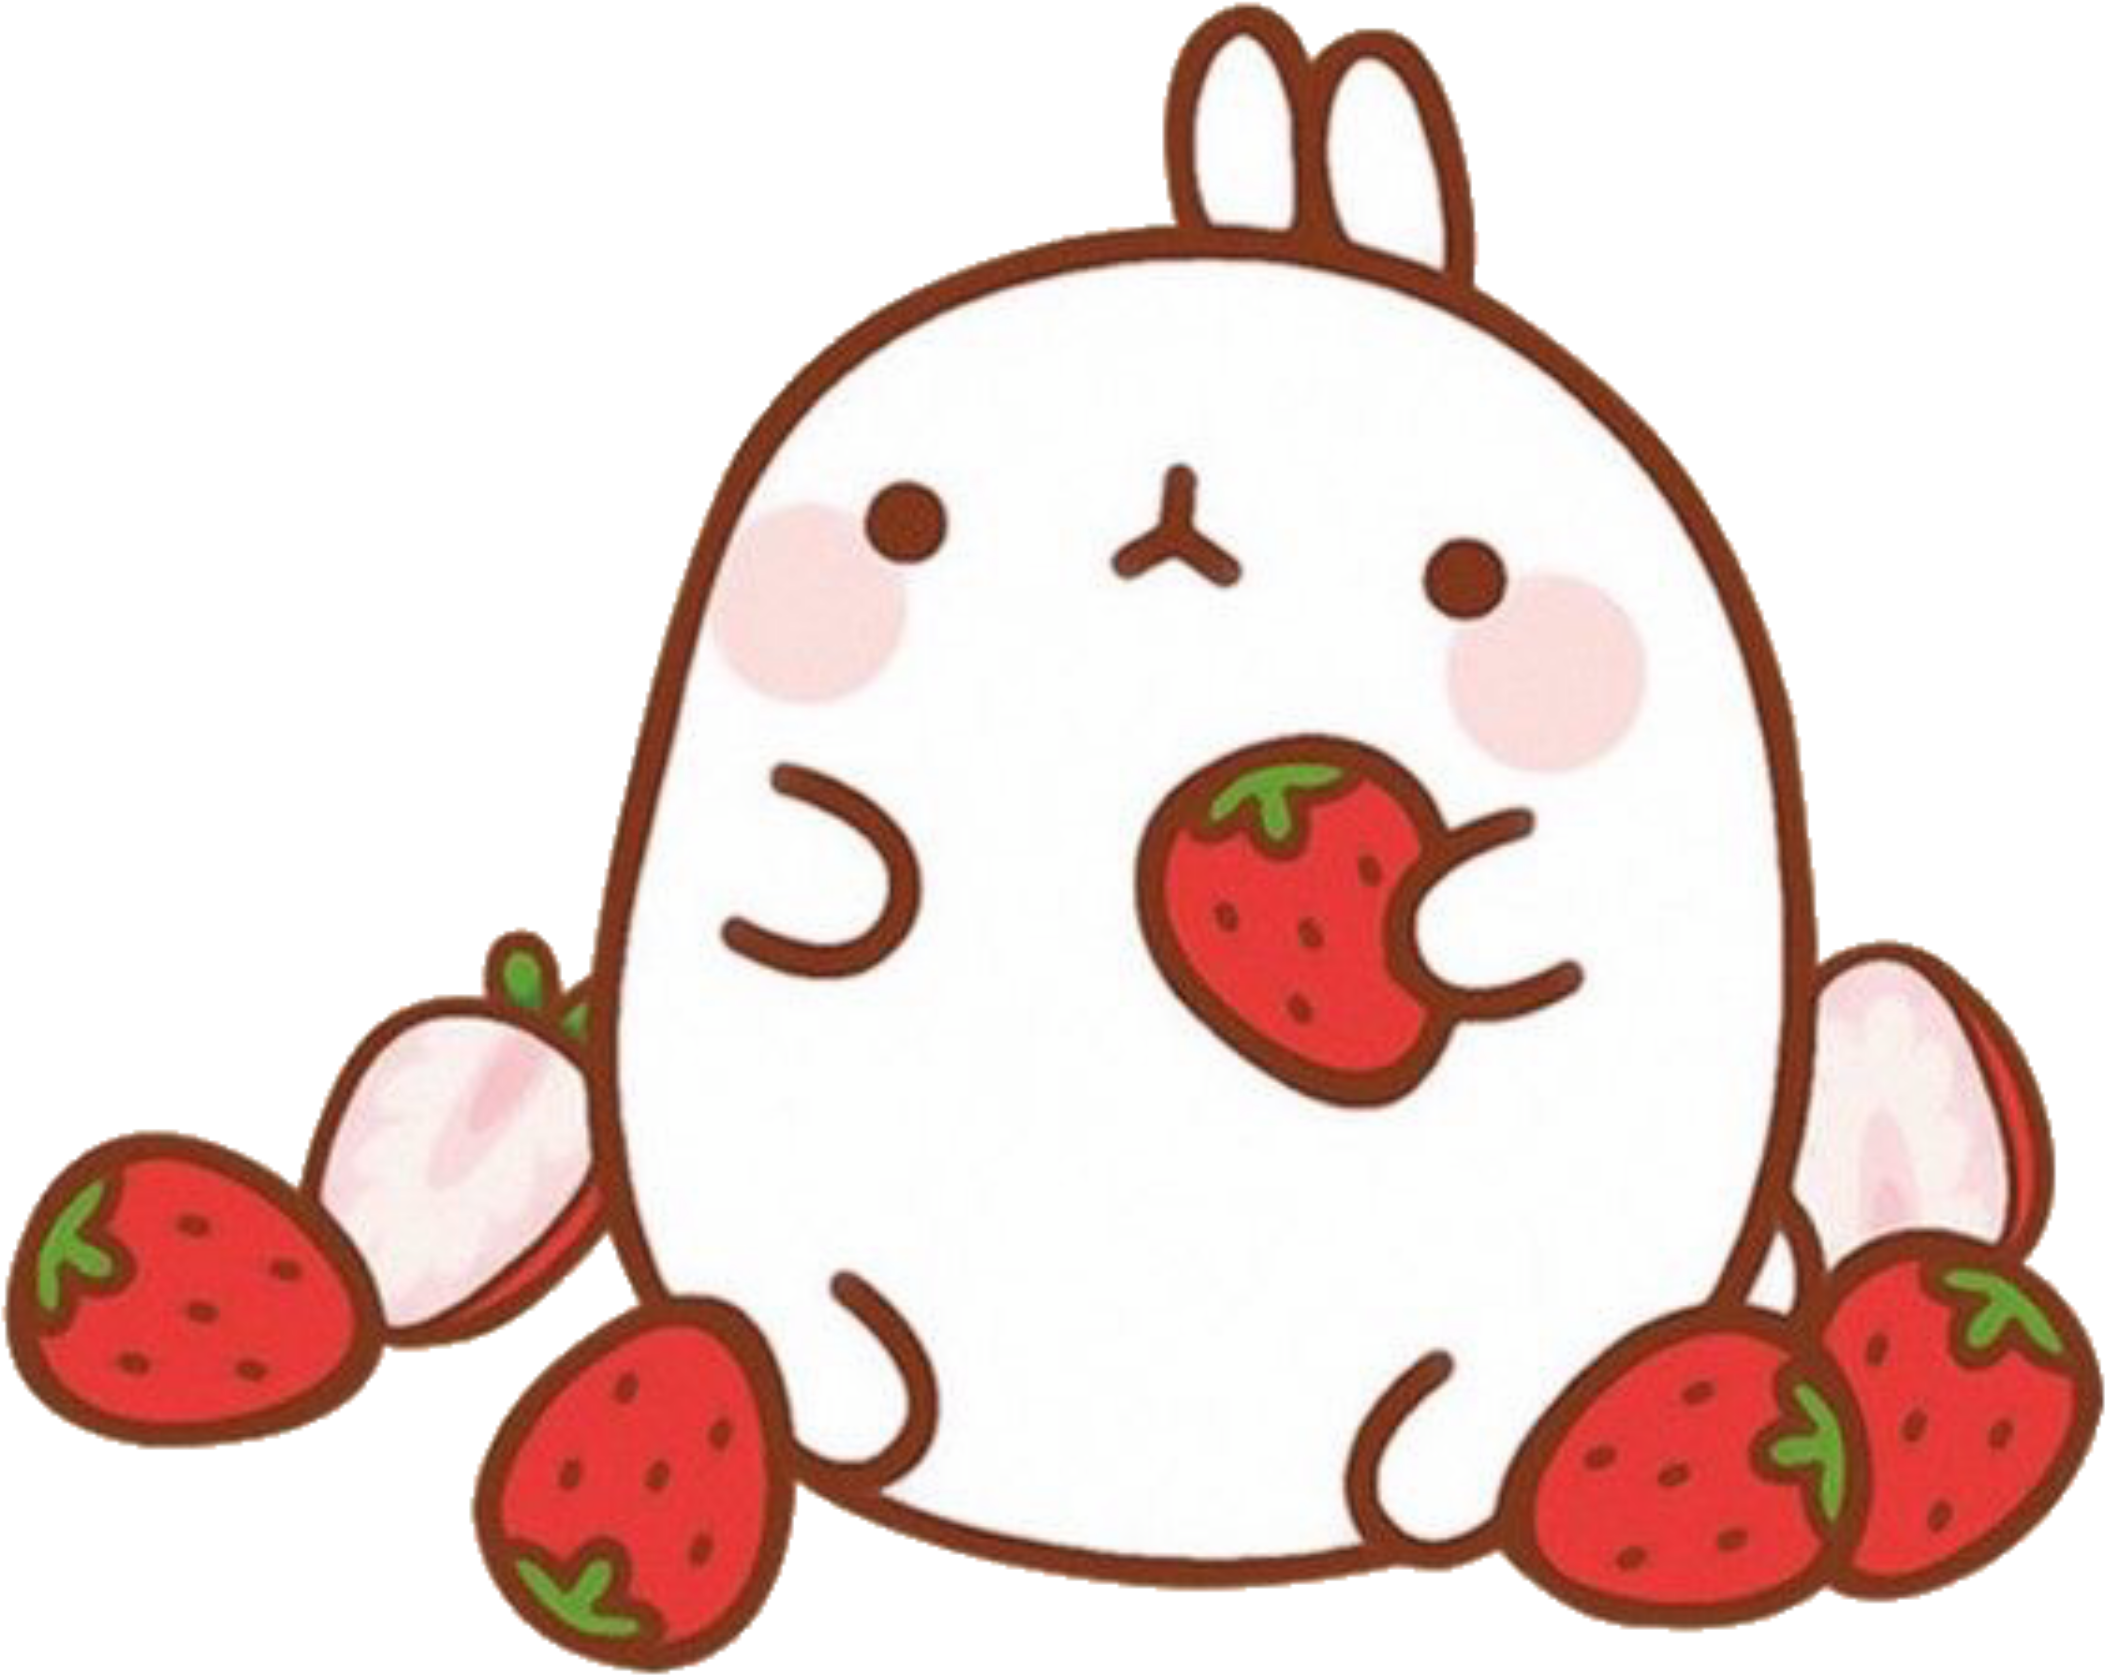 A Cartoon Rabbit With Strawberries